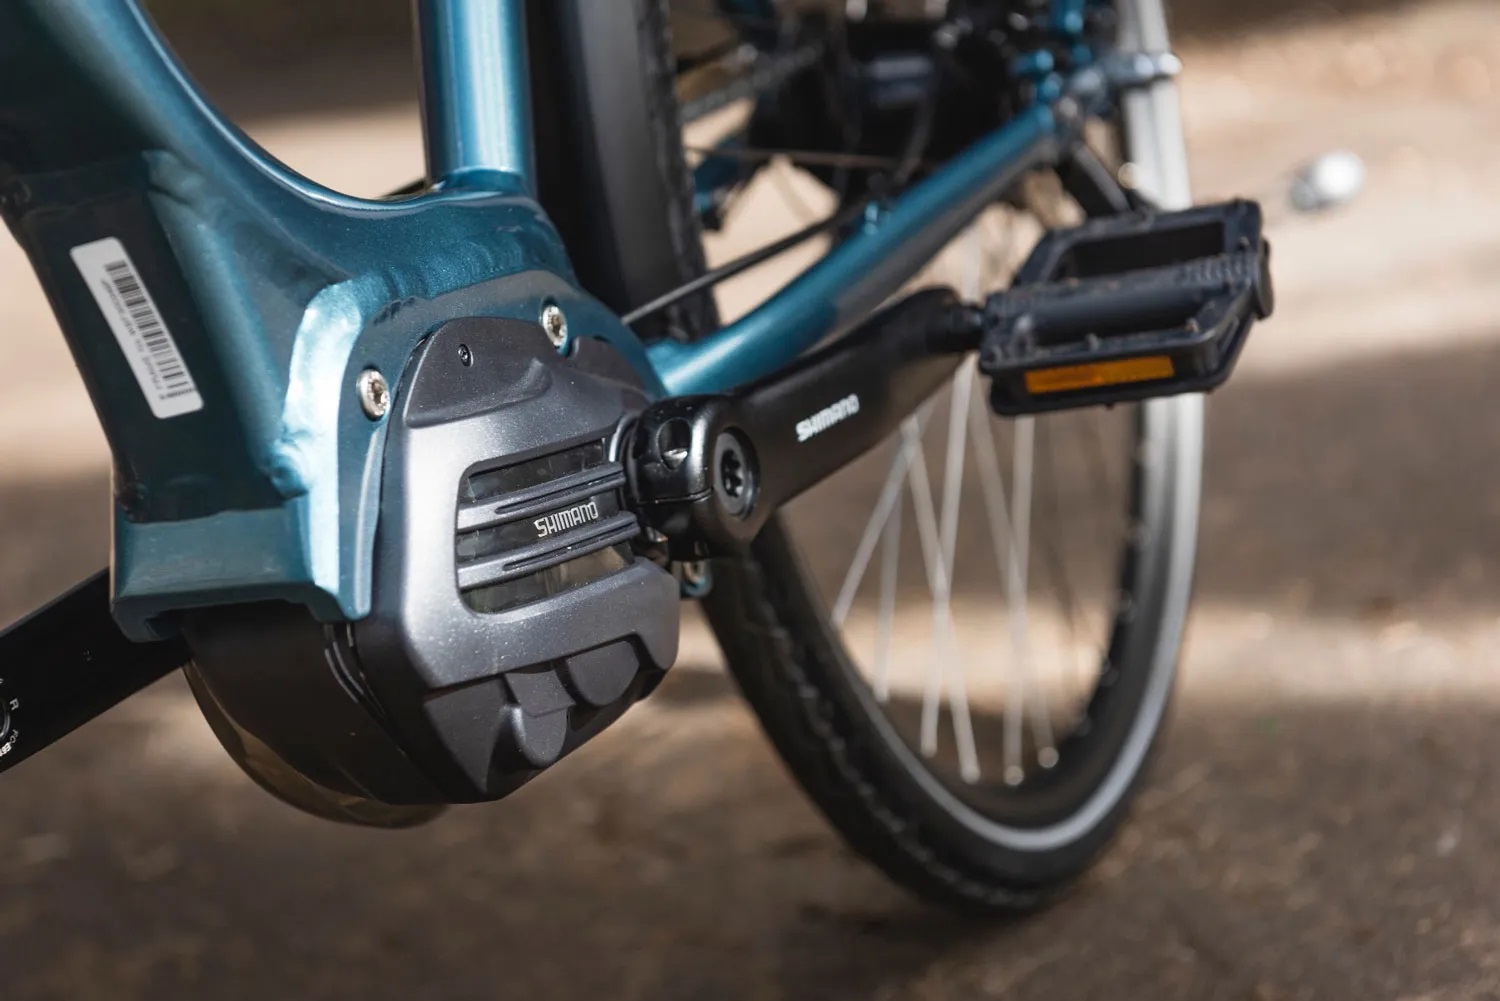 Close-up shot of Shimano mid-drive motor system for an electric bike